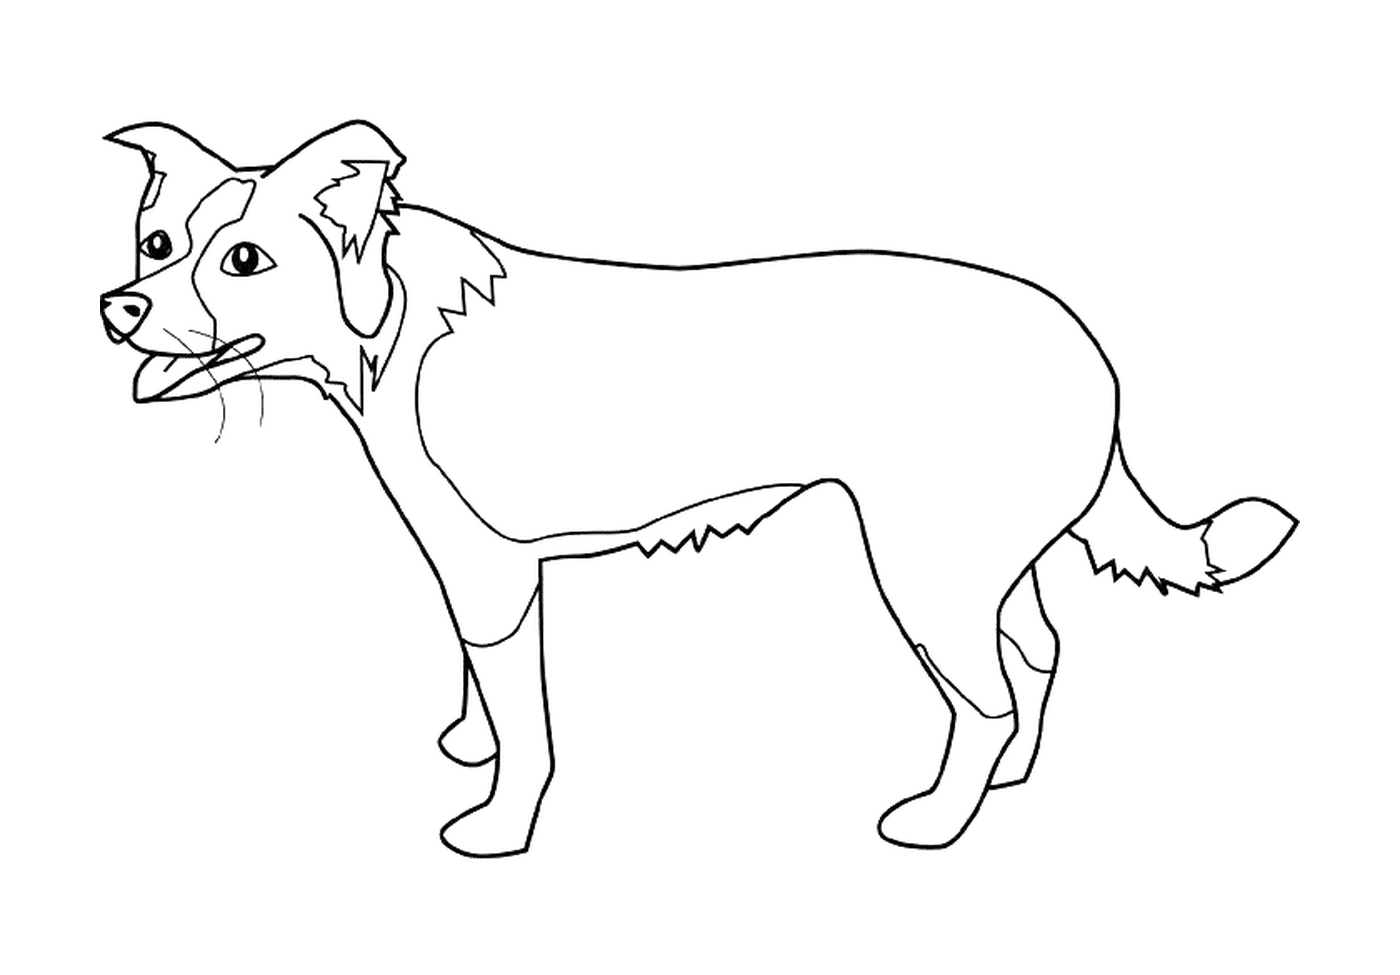  The contour of a dog standing on its four legs 